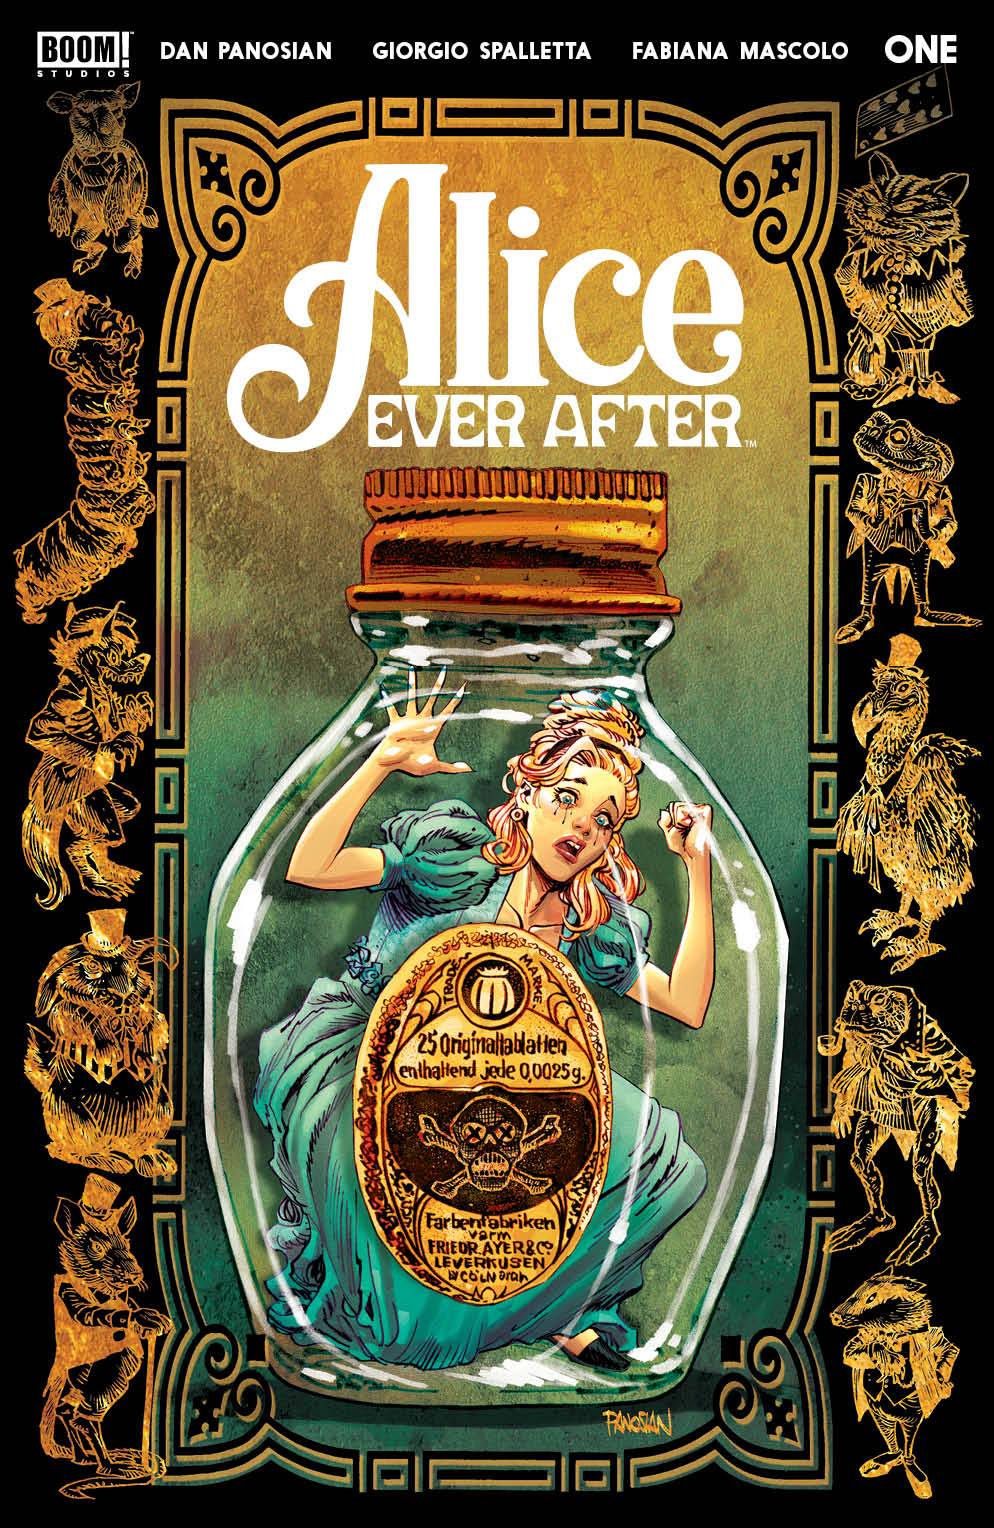 ALICE EVER AFTER #1 (OF 5) CVR A PANOSIAN